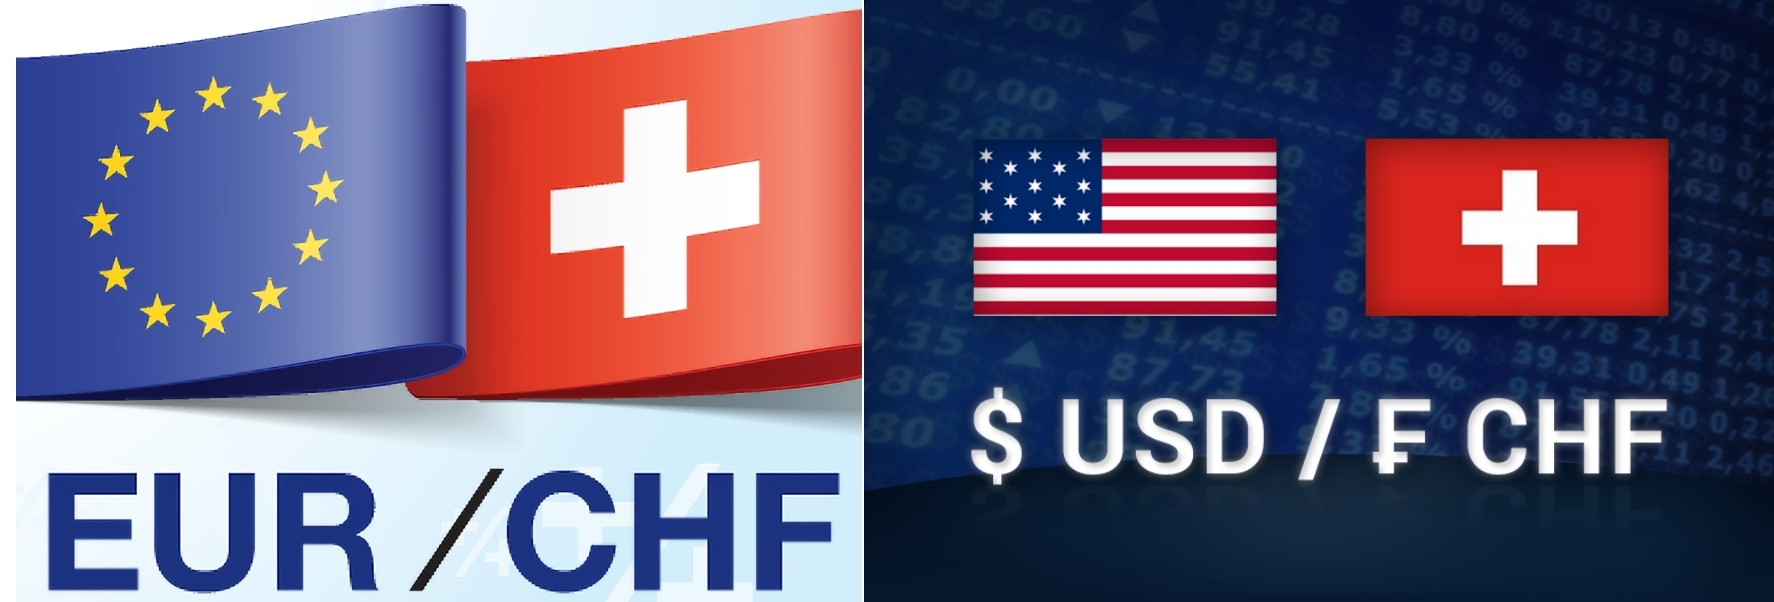 EUR/CHF and USD/CHF